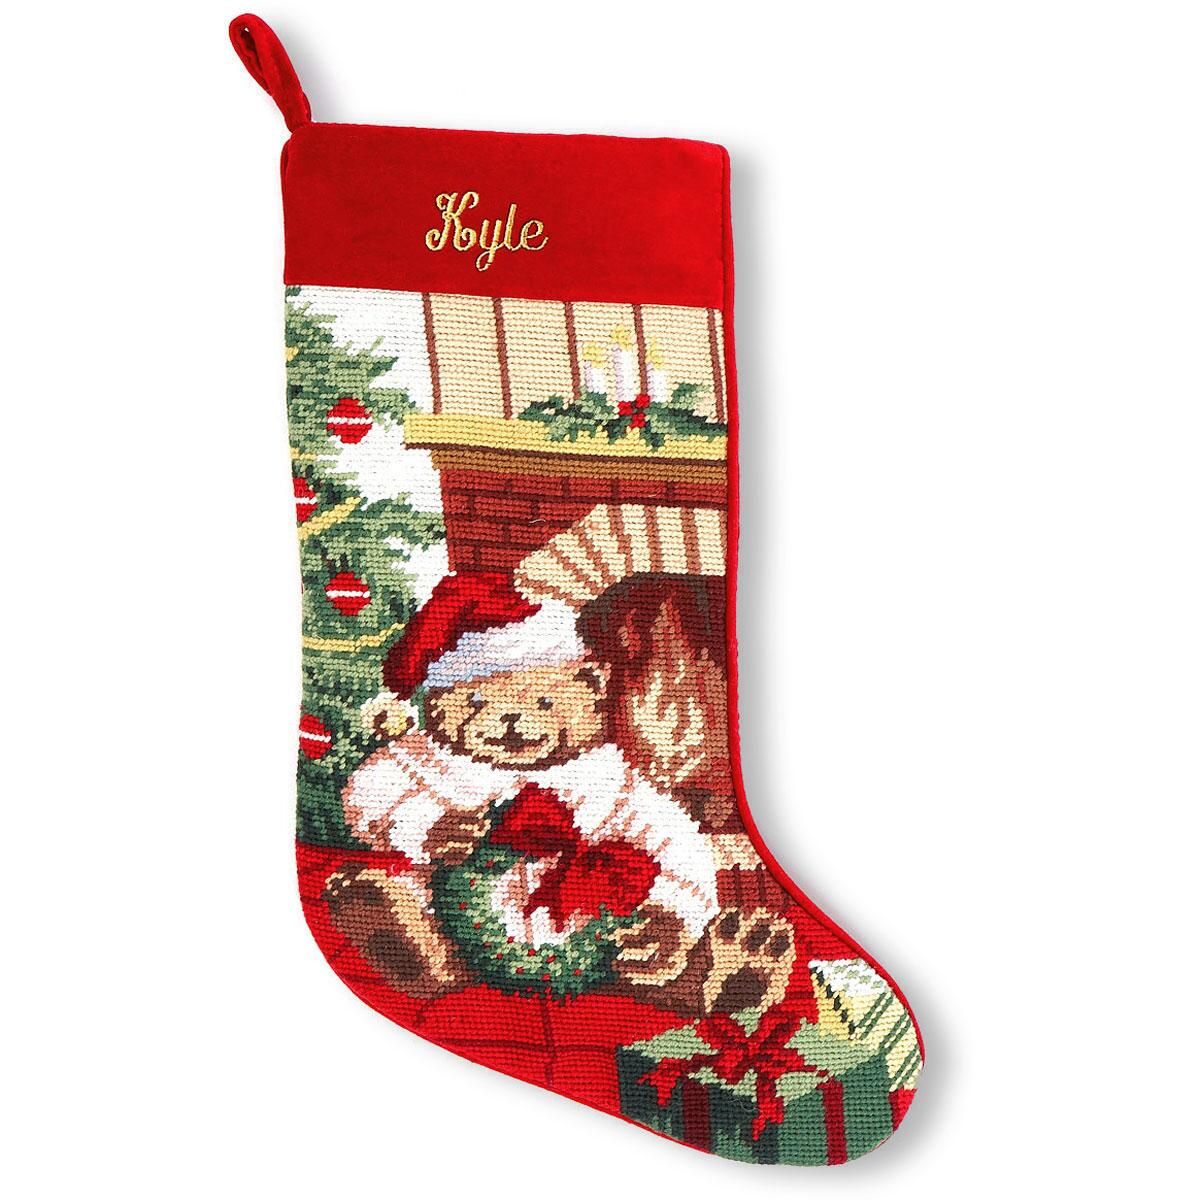 Snowman Heirloom Needlepoint Personalized Christmas Stocking